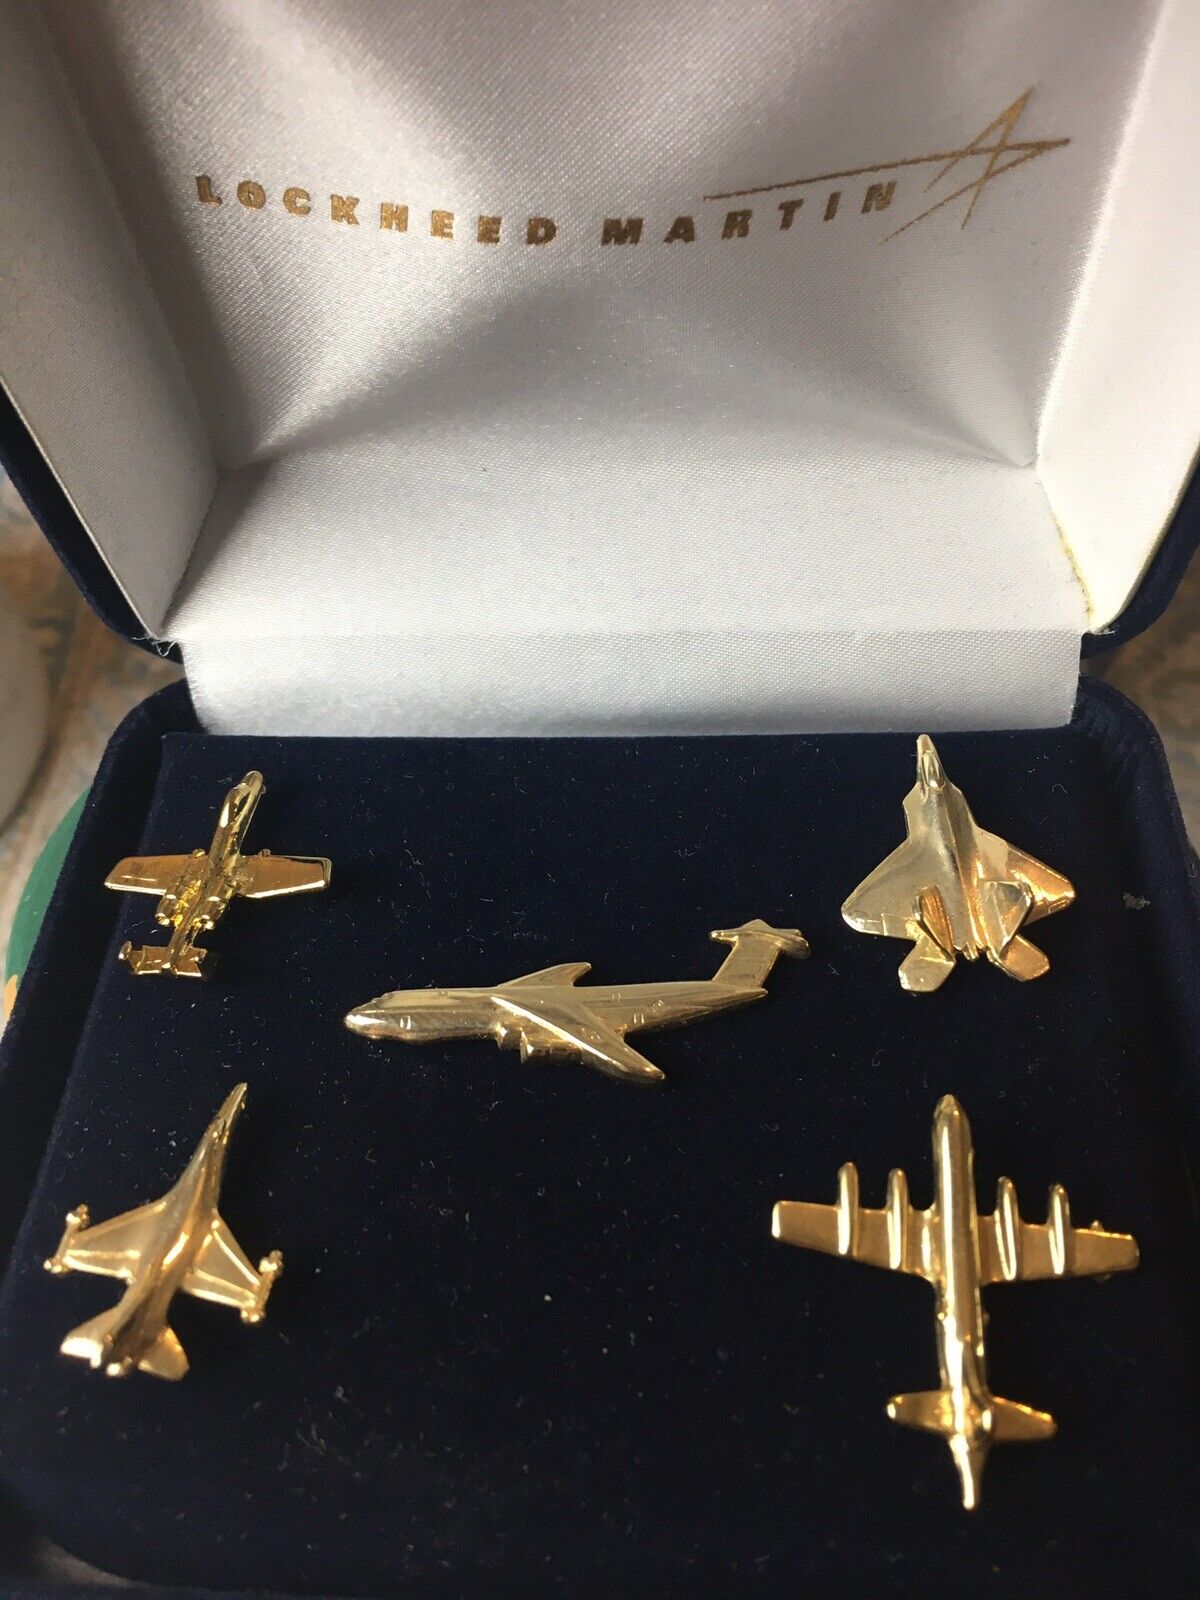 Lockheed Martin Employee Given Service Box Set Of Five Gold Lapel Pins NOS